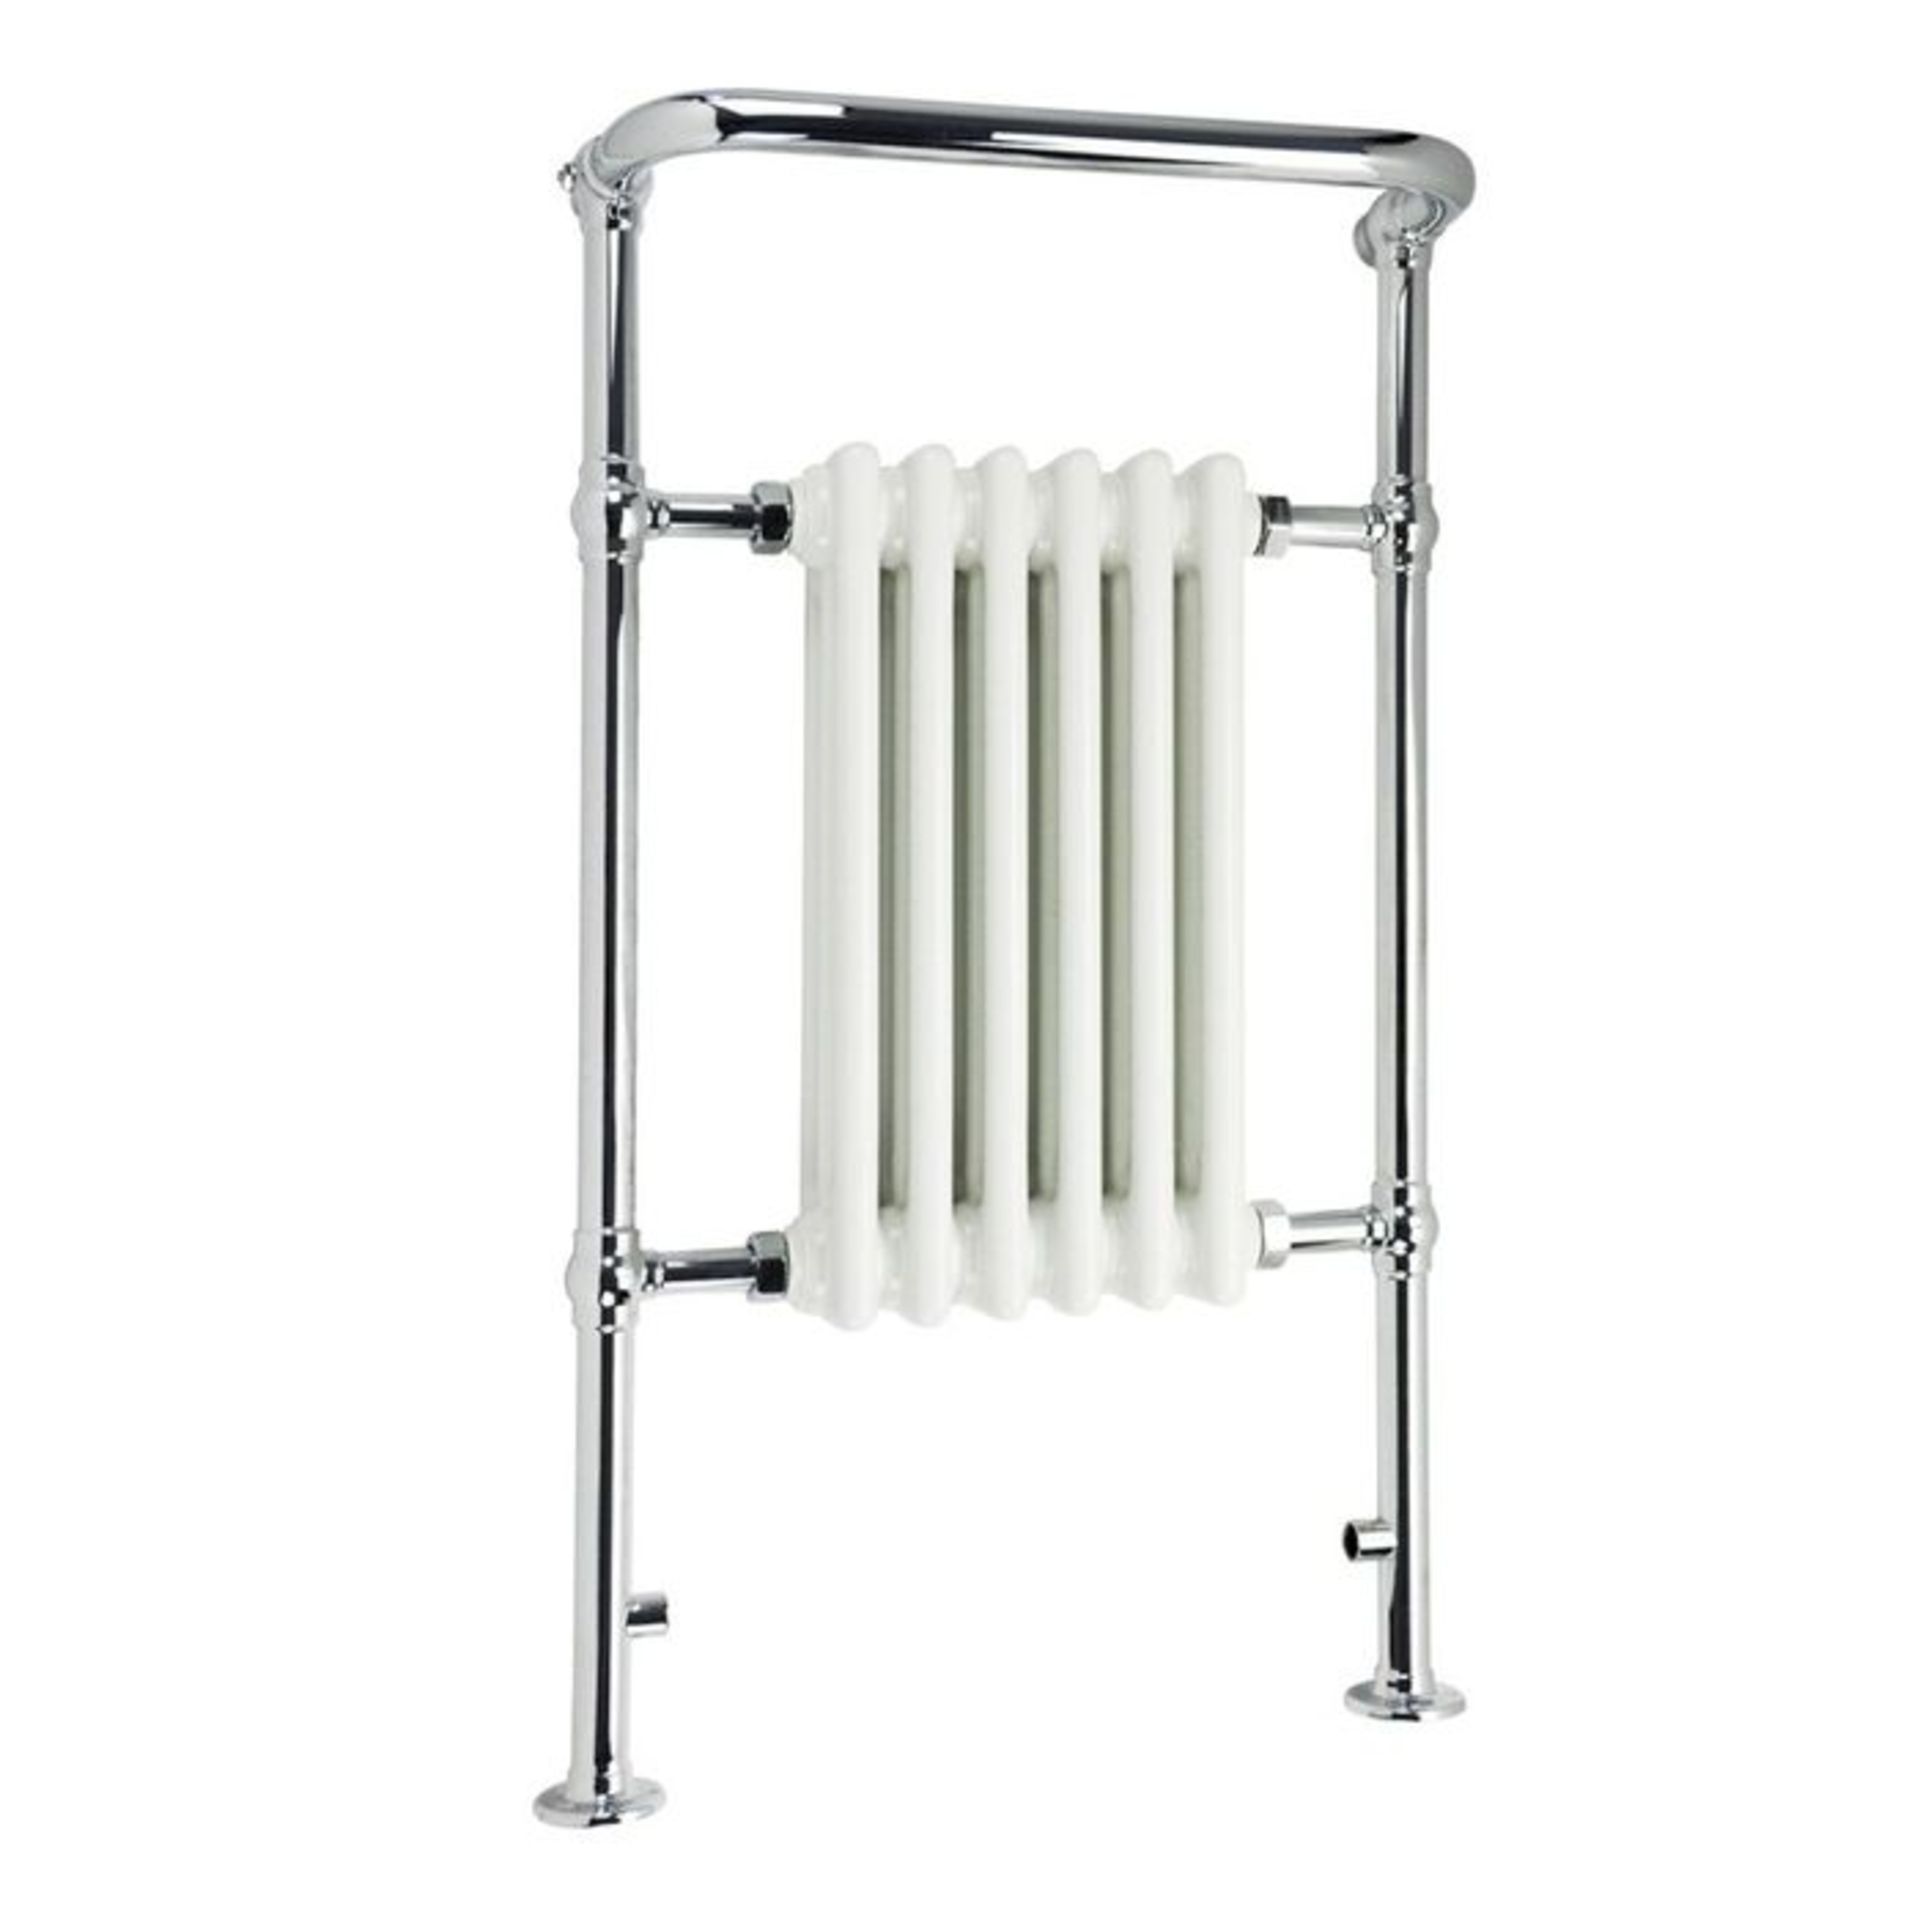 (AH41) 963x583mm Medium Traditional White Towel Rail Radiator - Cambridge. RRP £305.99. Made from - Image 3 of 3